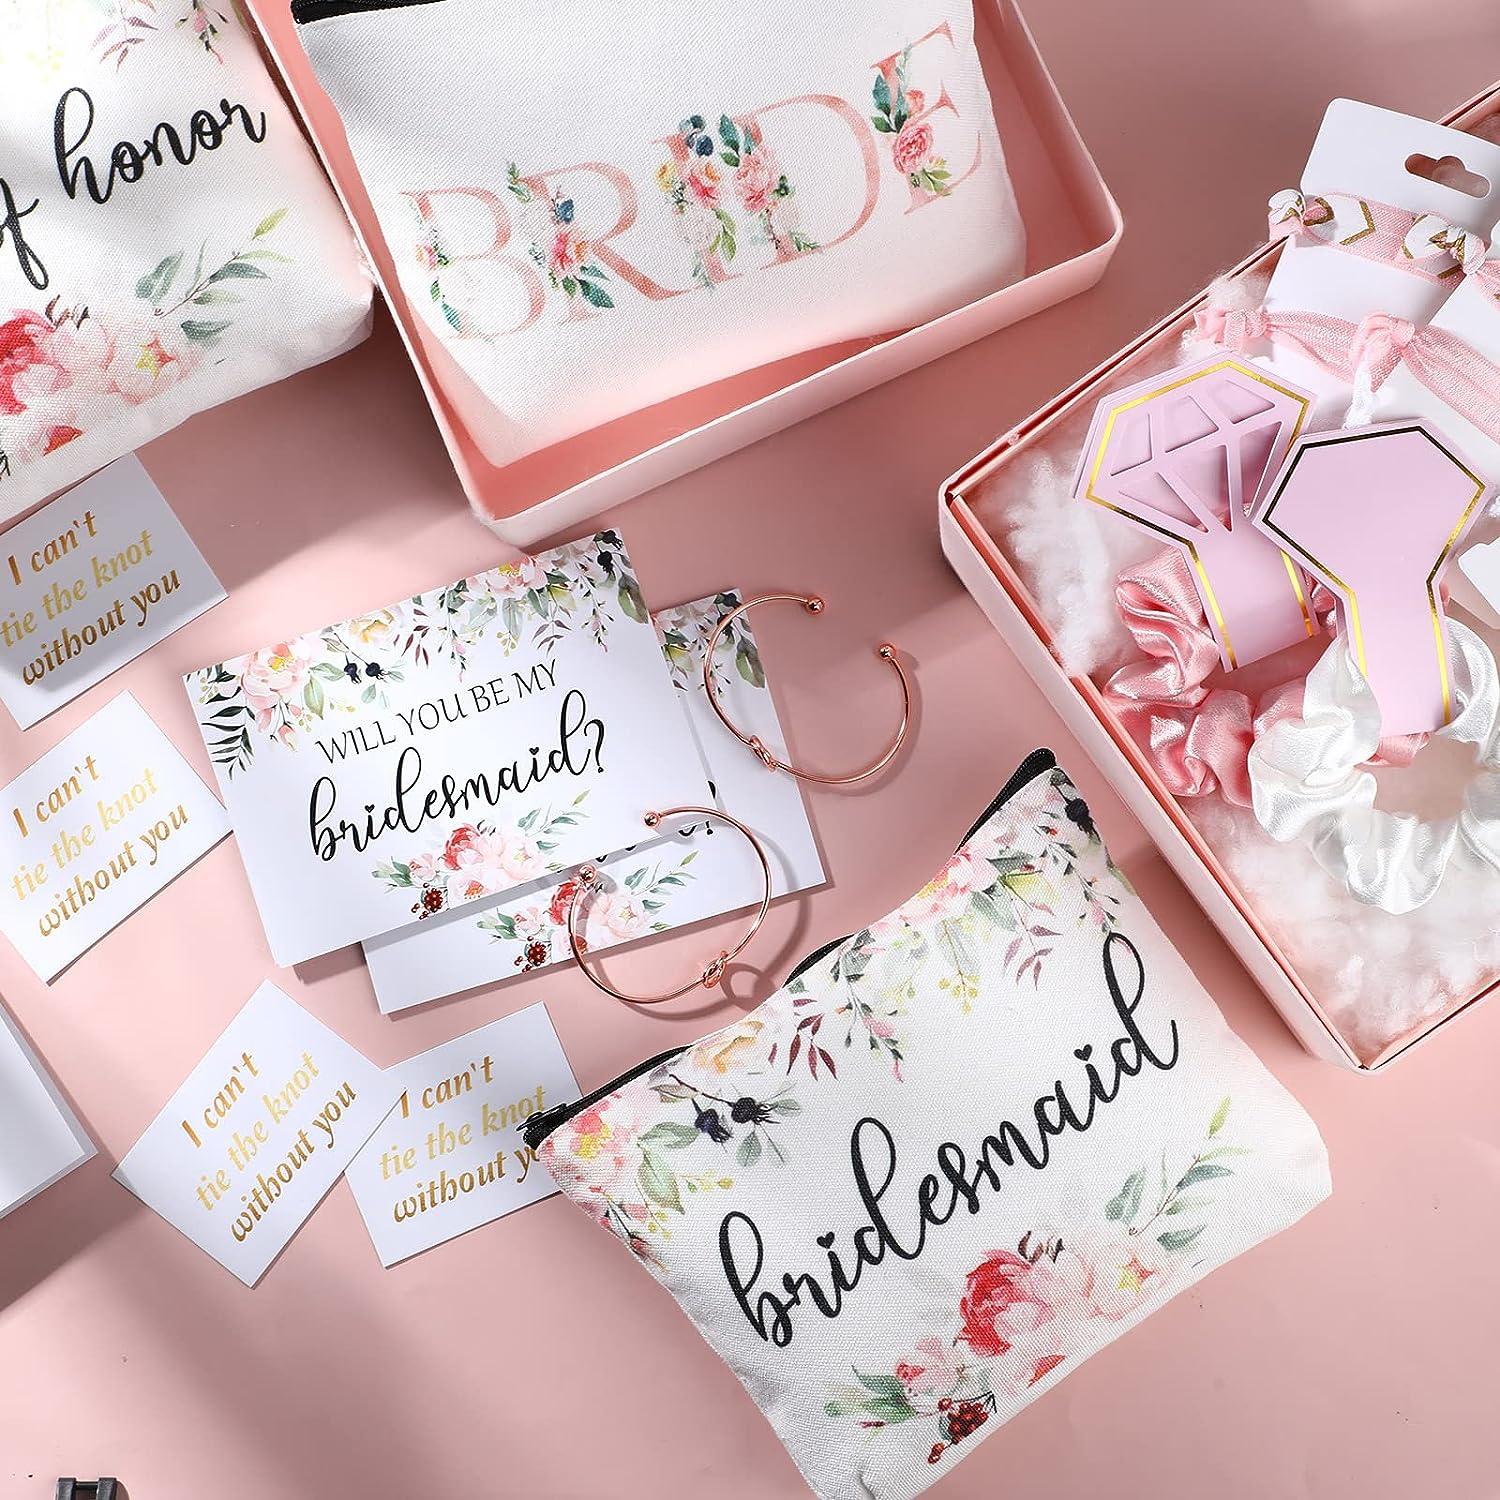 hanmsen bridal shower gifts for bride to be,wedding gifts for